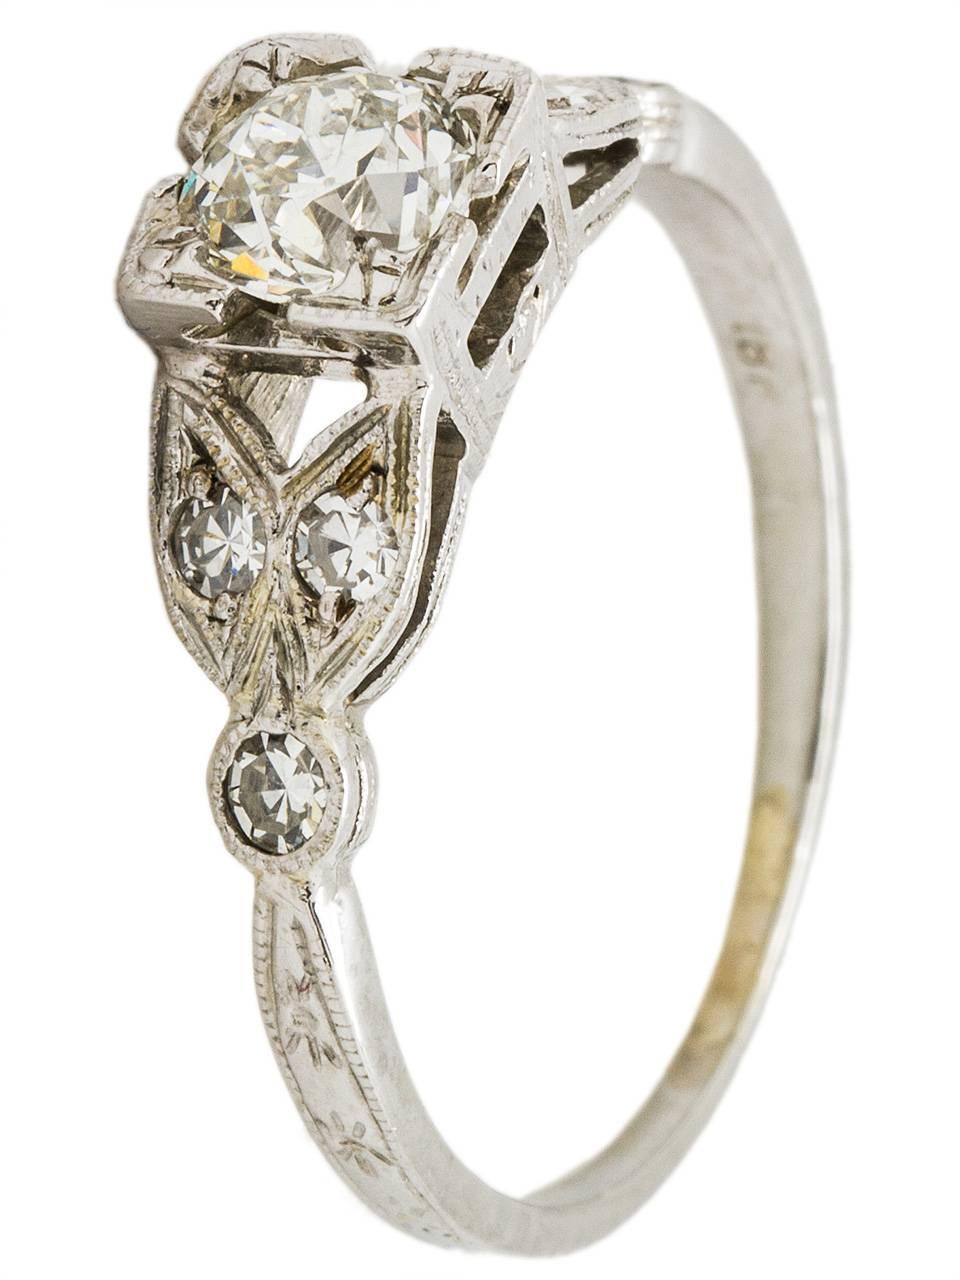 Beautifully detailed 18K white gold antique engagement ring featuring a stunning 0.48 carat old European cut diamond, I color and SI2 clarity. With six bead set side diamonds set in a floral motif, this ring would be stunning paired wit one of our